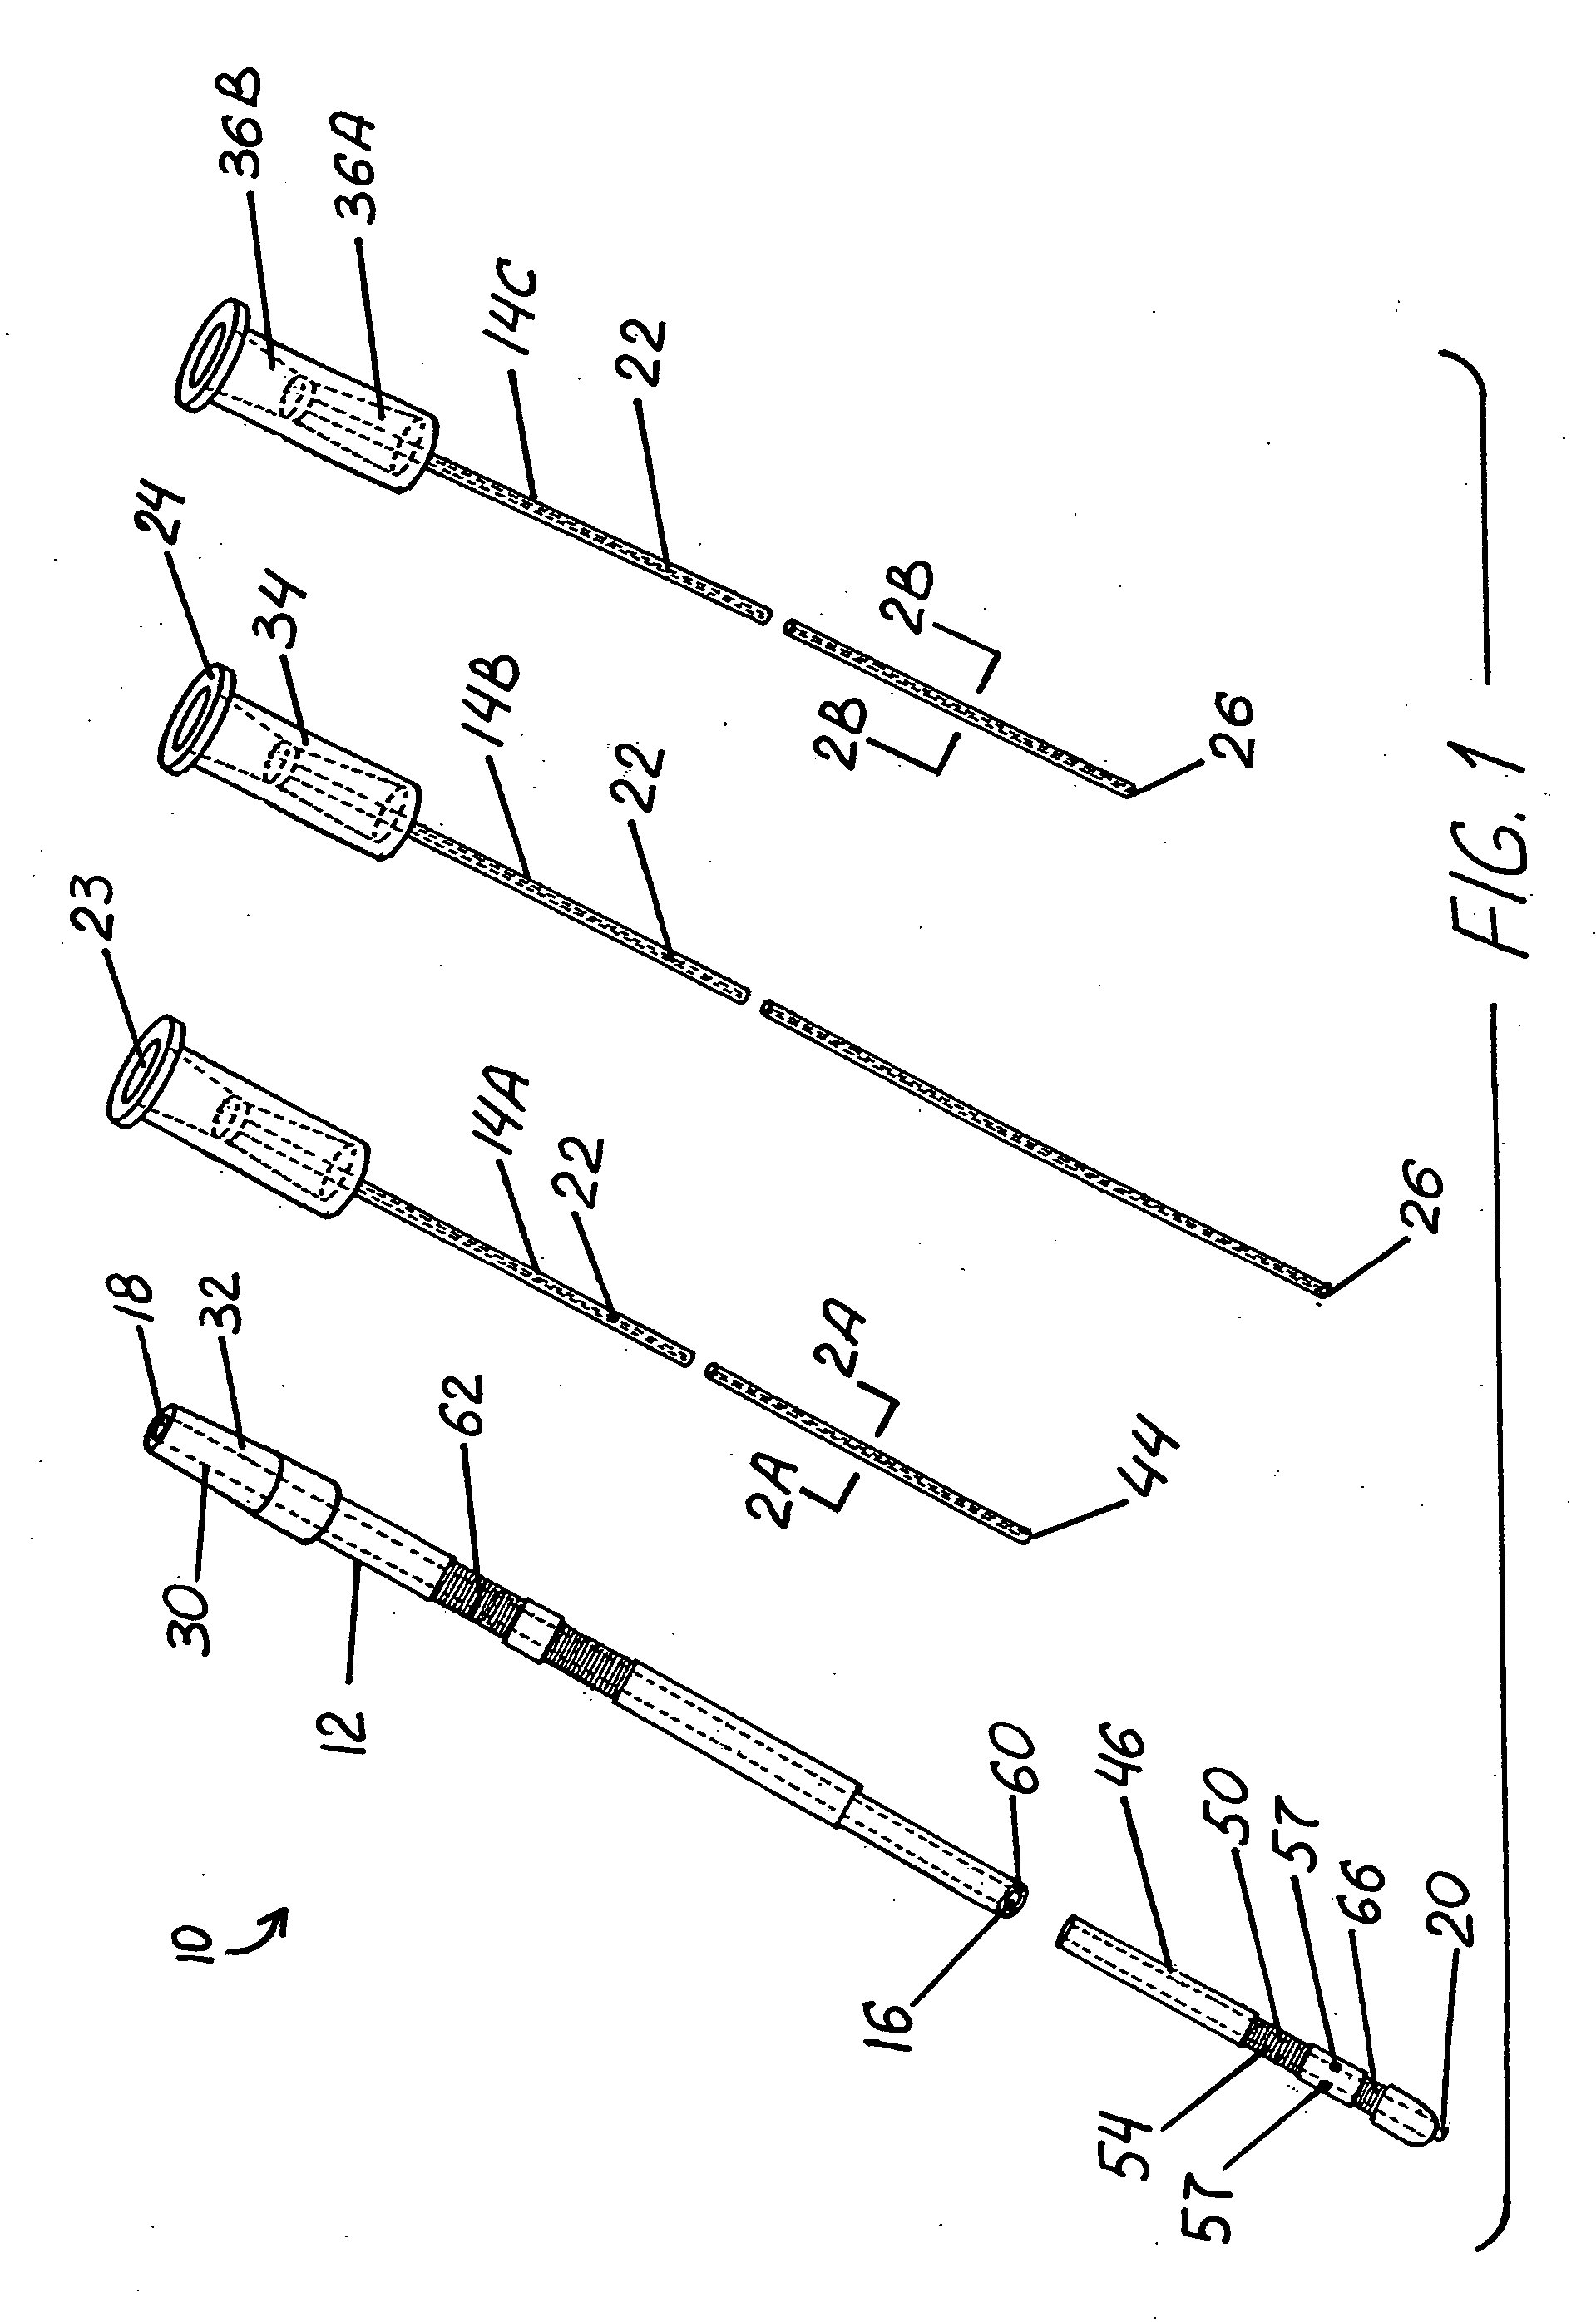 Catheter system for intracranial treatment